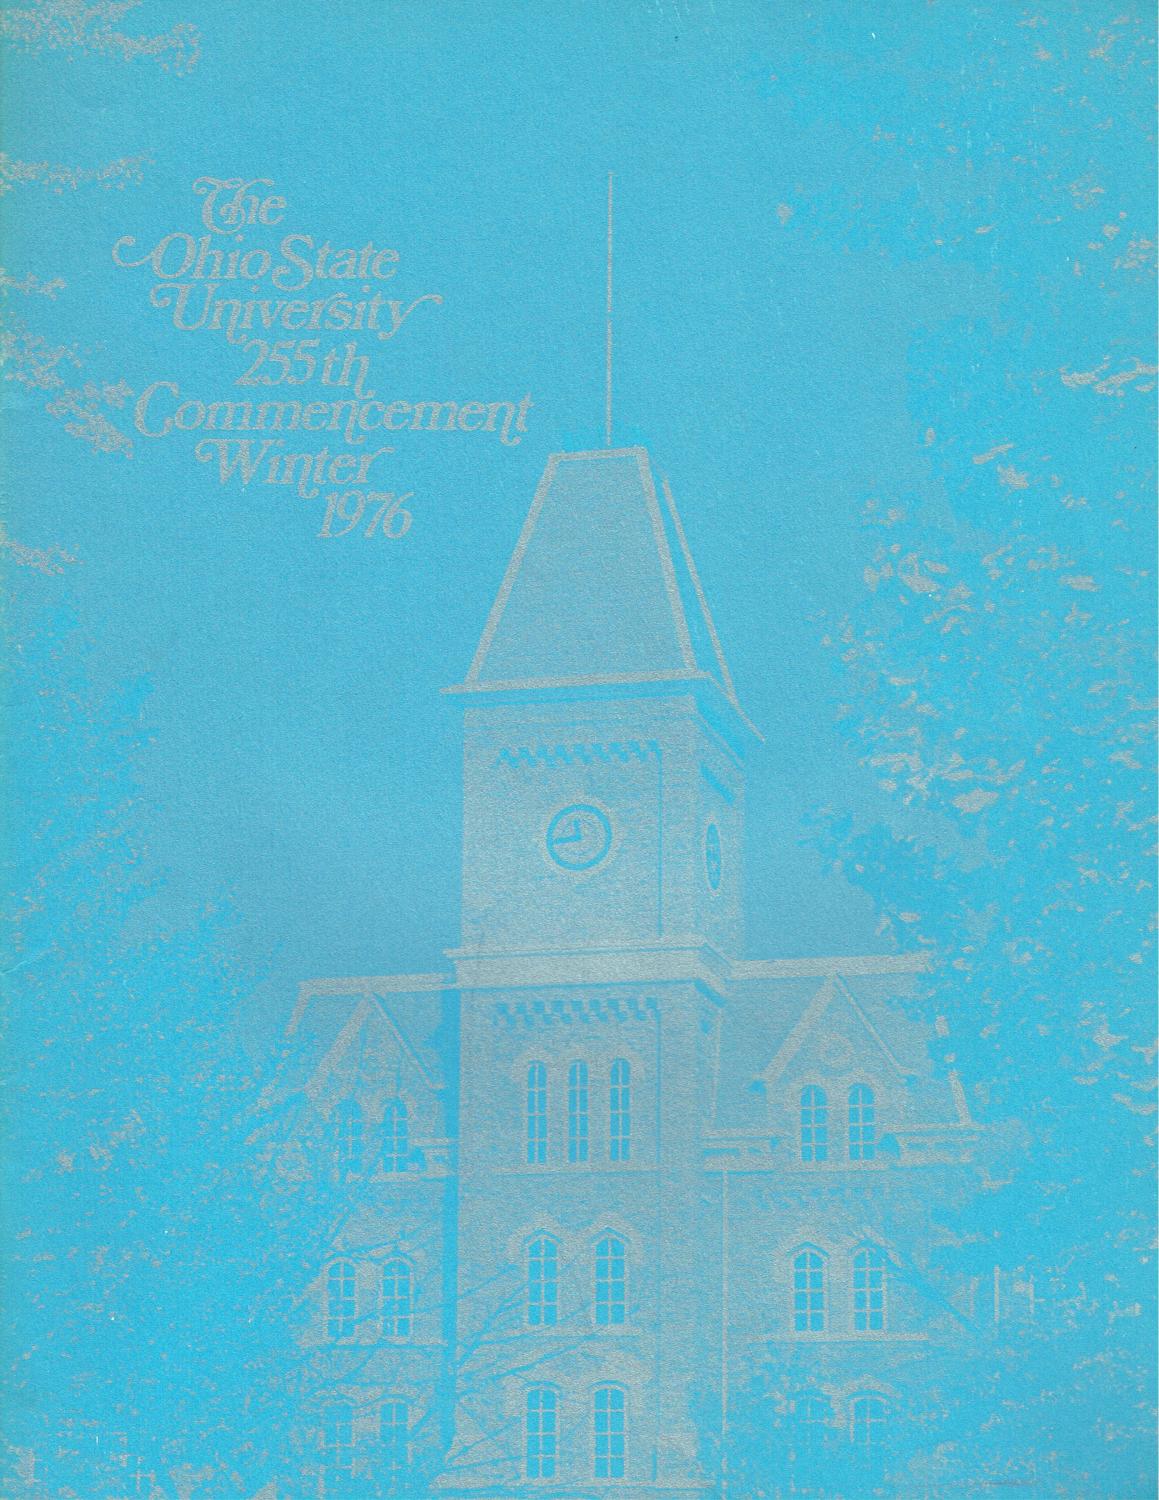 The Ohio State University 255th Commencement Winter 1976 Program By The Ohio State University